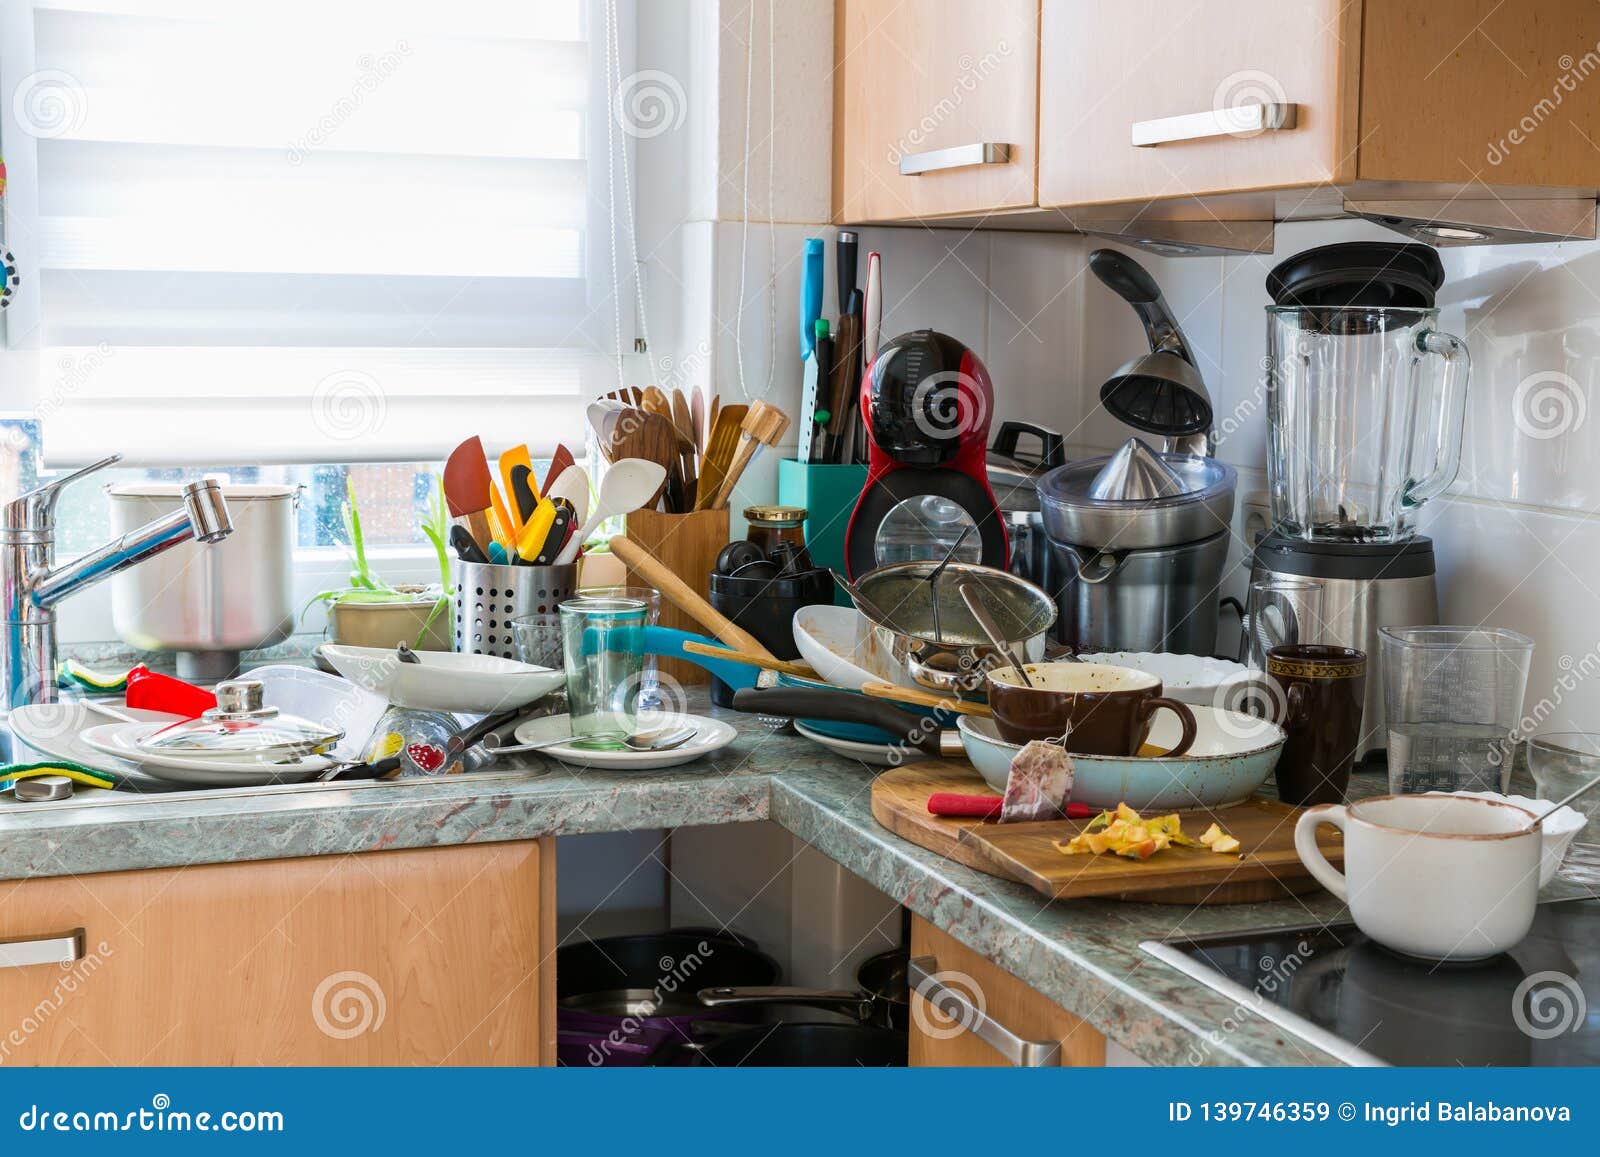 Compulsive Hoarding Syndrom - Messy Kitchen Stock Image - Image of ...